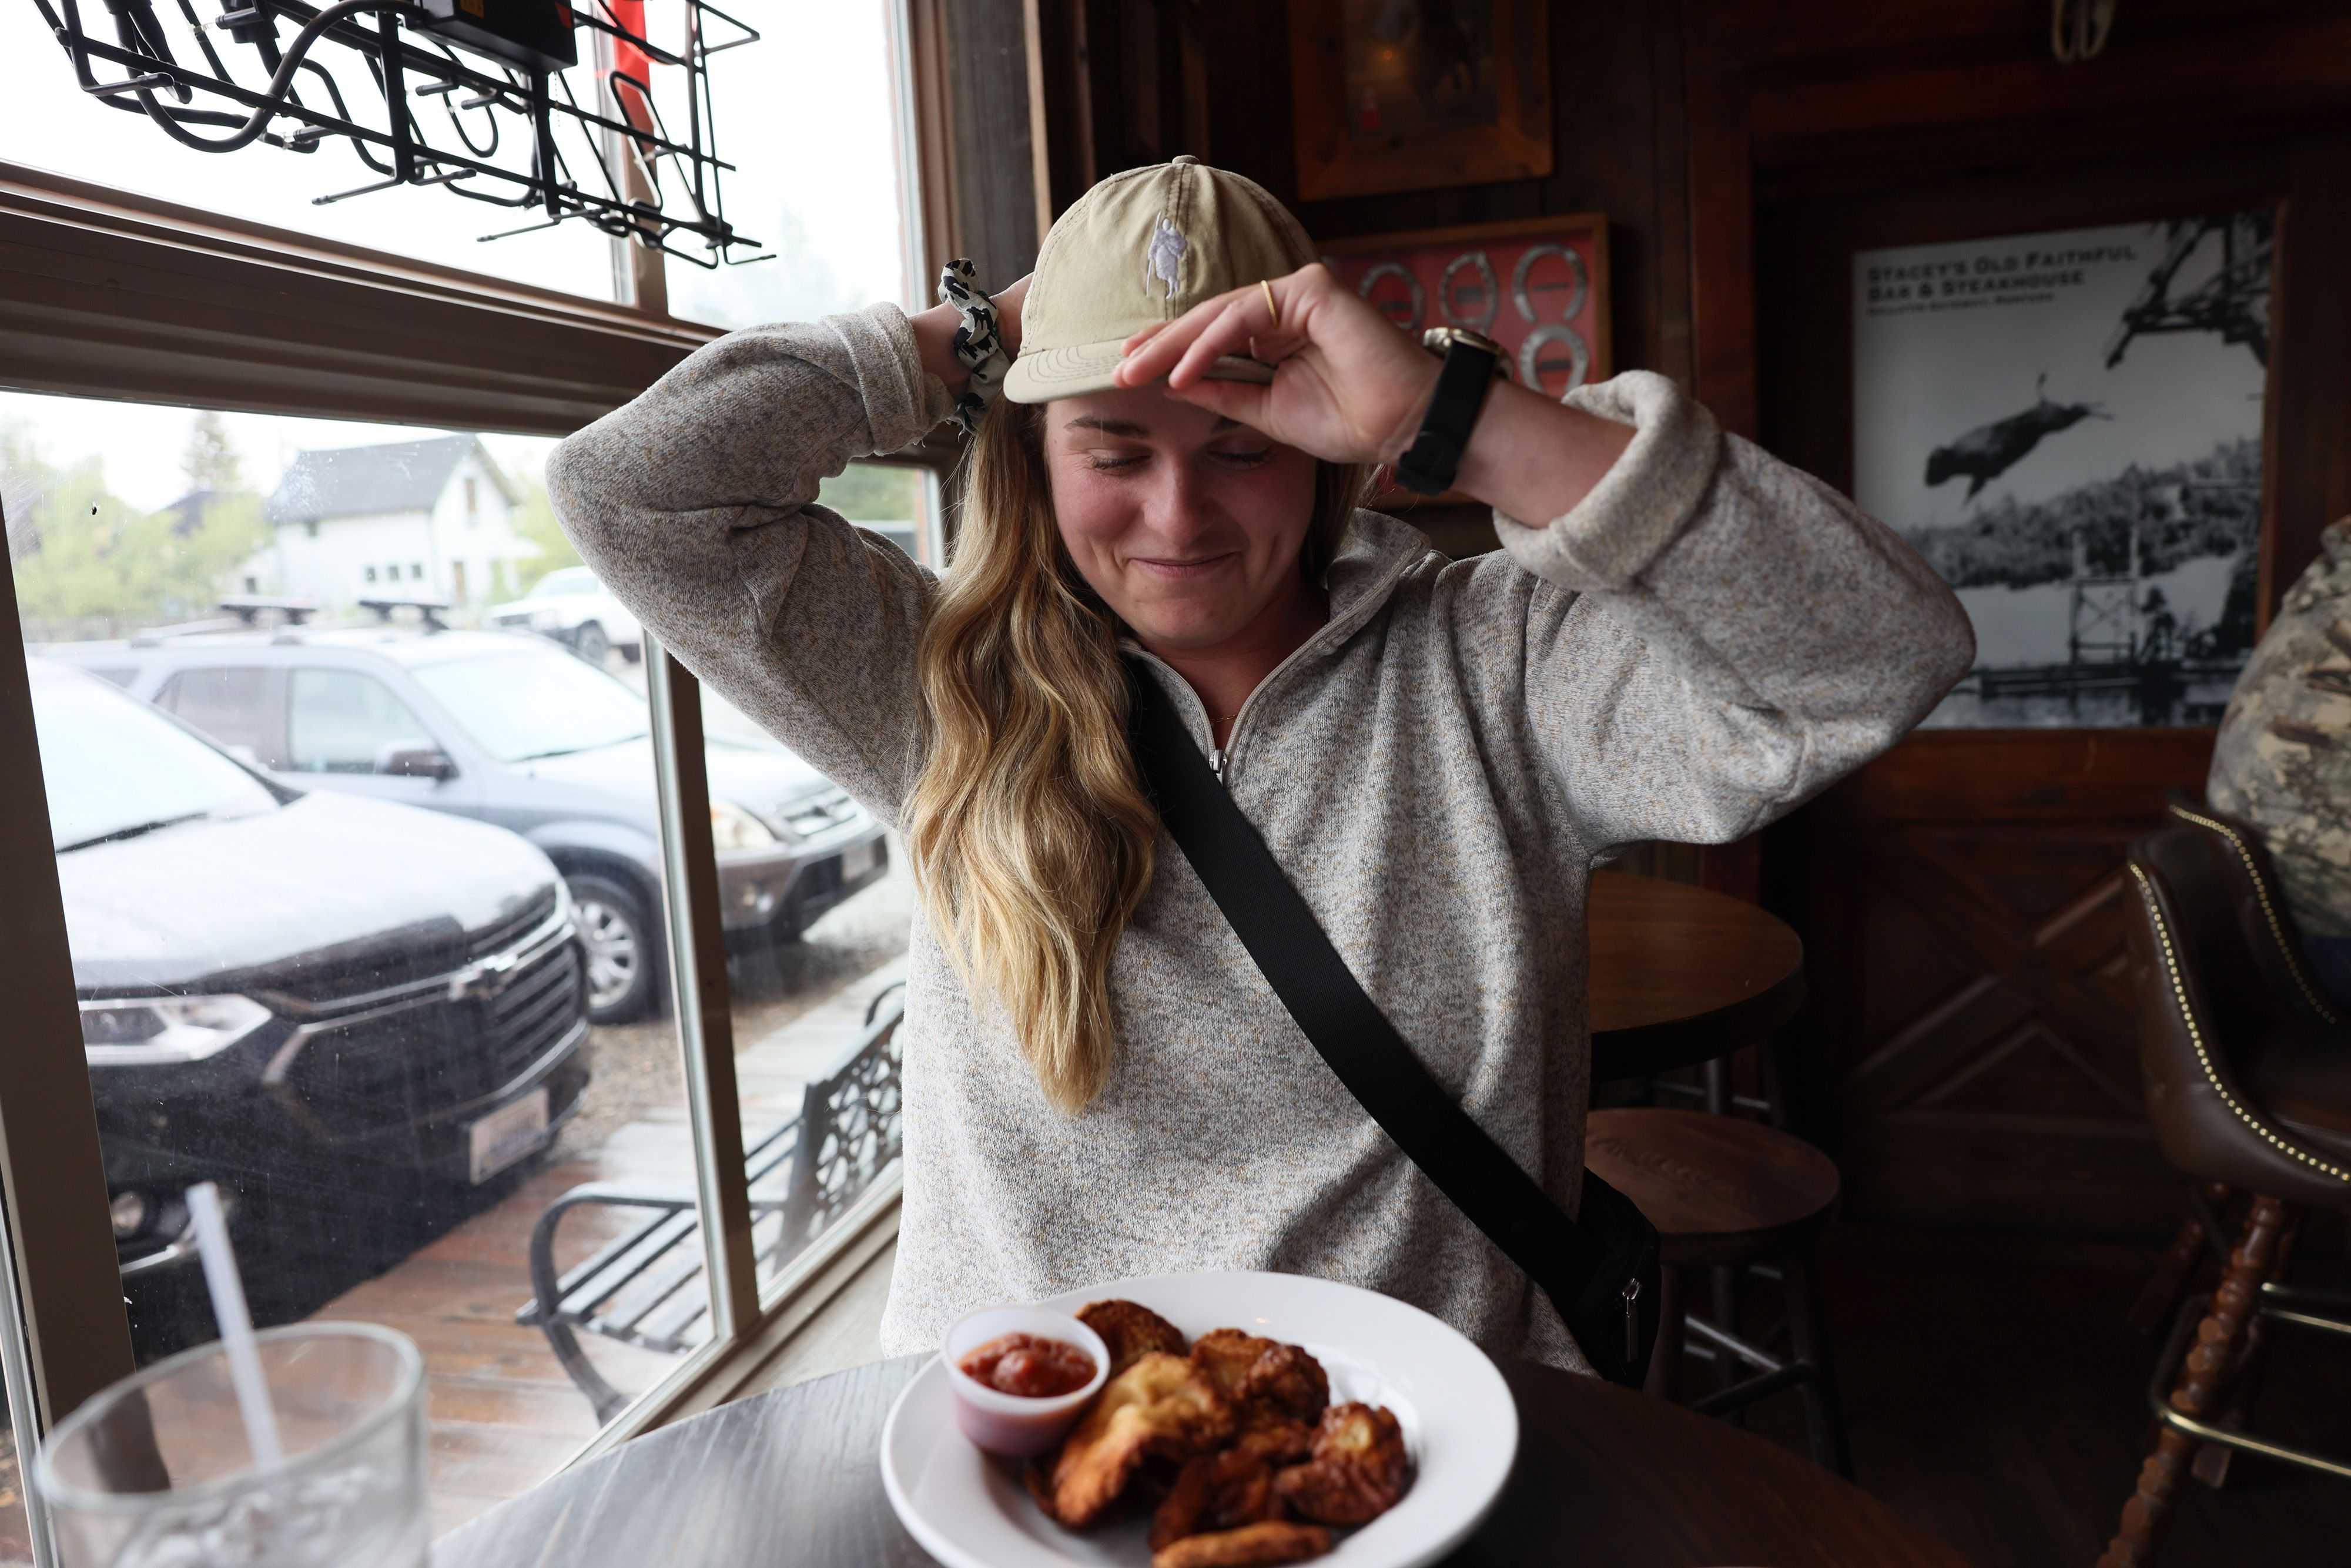 Globe reporter Hanna Krueger prepares to try Rocky Mountain Oysters, a dish made from bull testicles, at Stacey's Old Faithful Bar & Steakhouse in Gallatin Gateway, Mont.